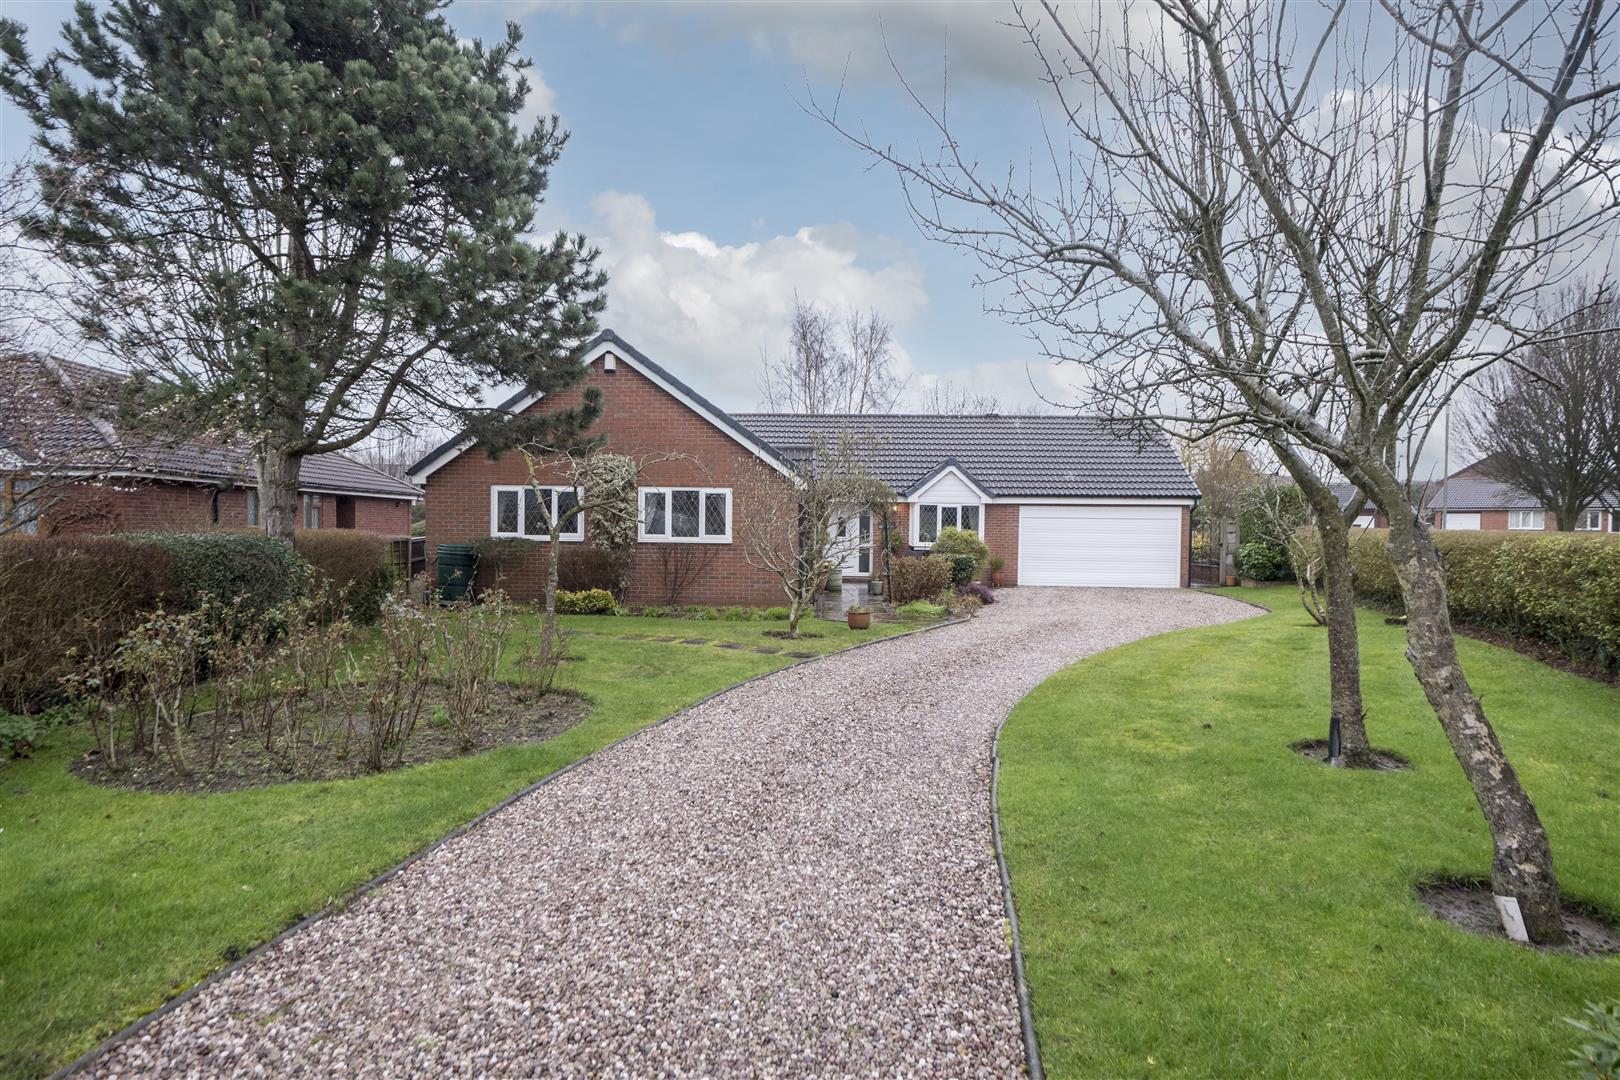 4 bedroom  Detached Bungalow for Sale in Winsford